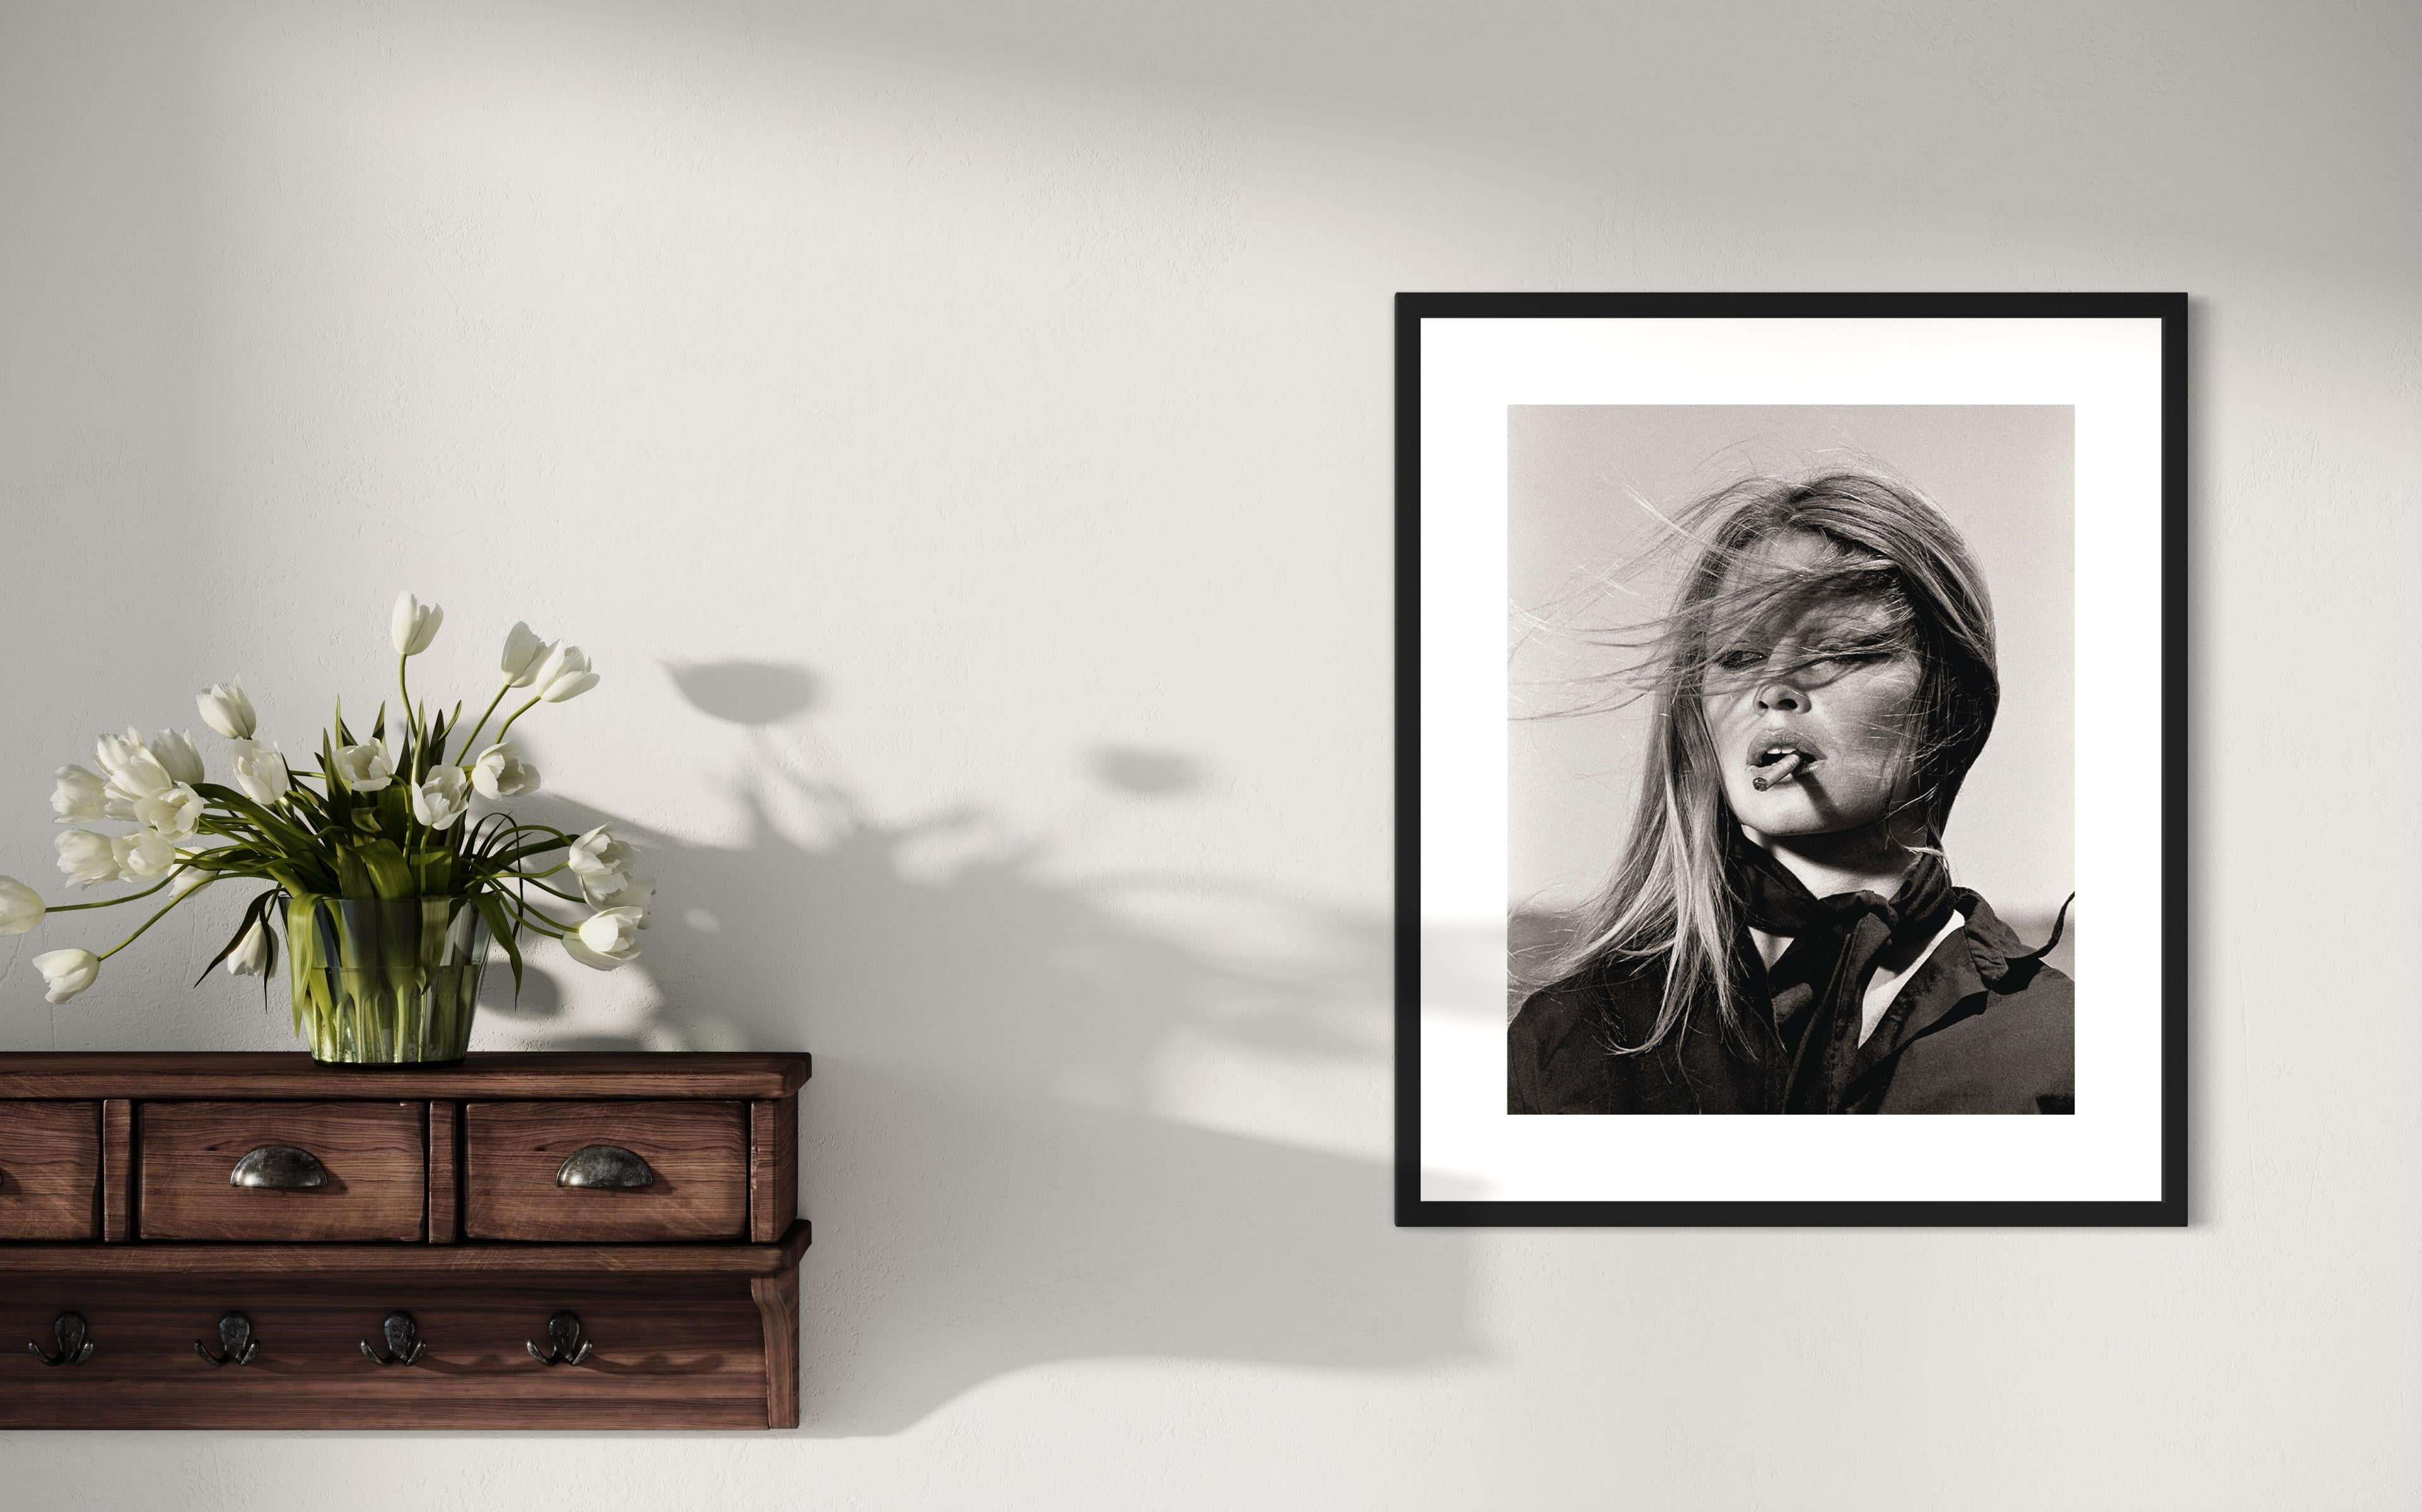 Bridgette Bardot with Cigar (Co-Signed) by Terry O'Neill, 1971 For Sale 2